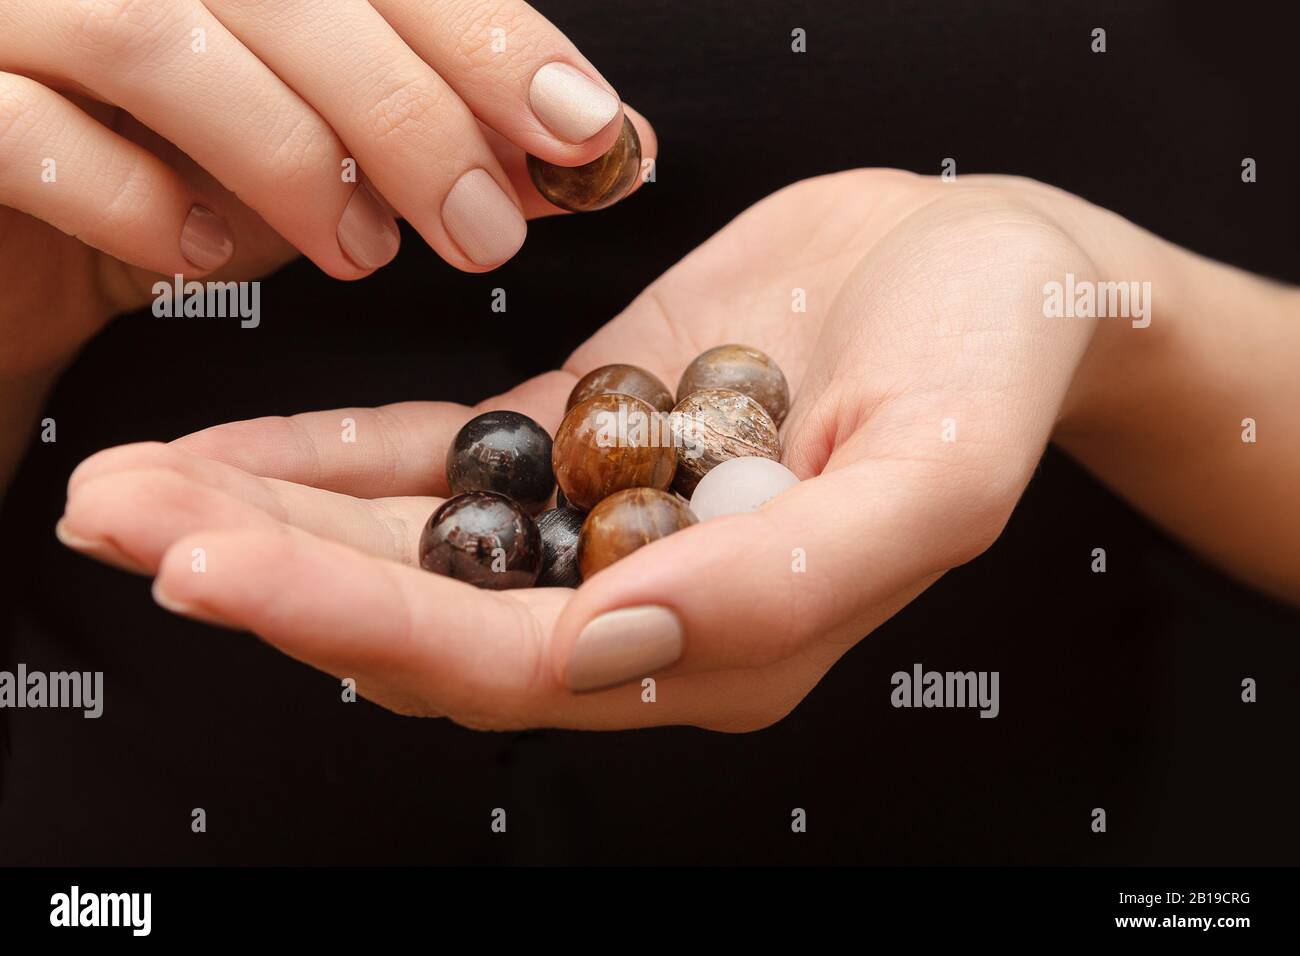 Round stones in female hands on black background. Stock Photo